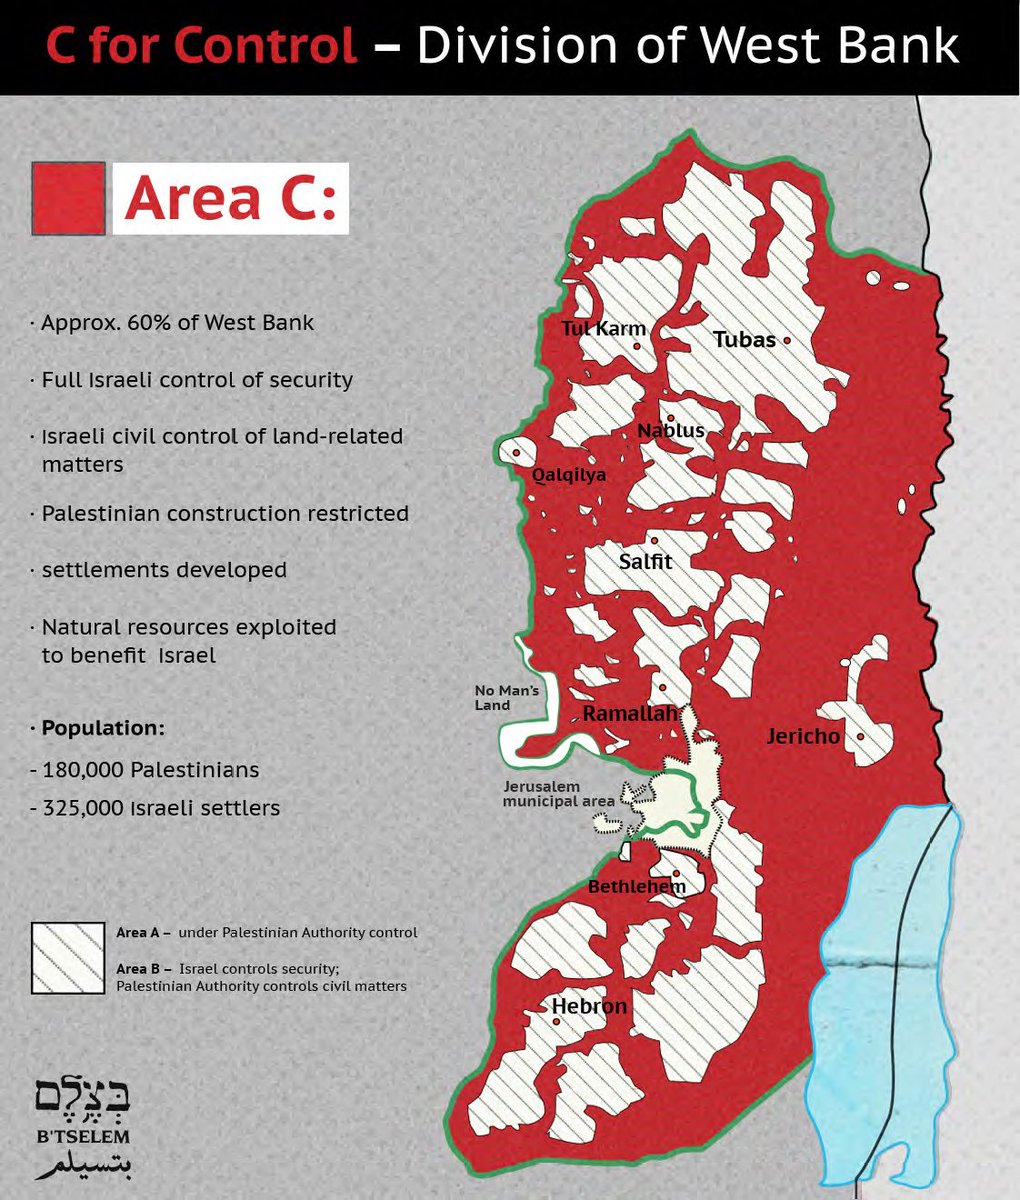 @andrewhobbins5 @PSCupdates @redsarah99 Gaza is in theory not occupied, they pulled out the settlements, but its a tiny strech of land that is blockaded so its barely better than an open air prison. The West Bank is approx 60% occupied and the rest is so atomised it almost might as well be (see pic below).